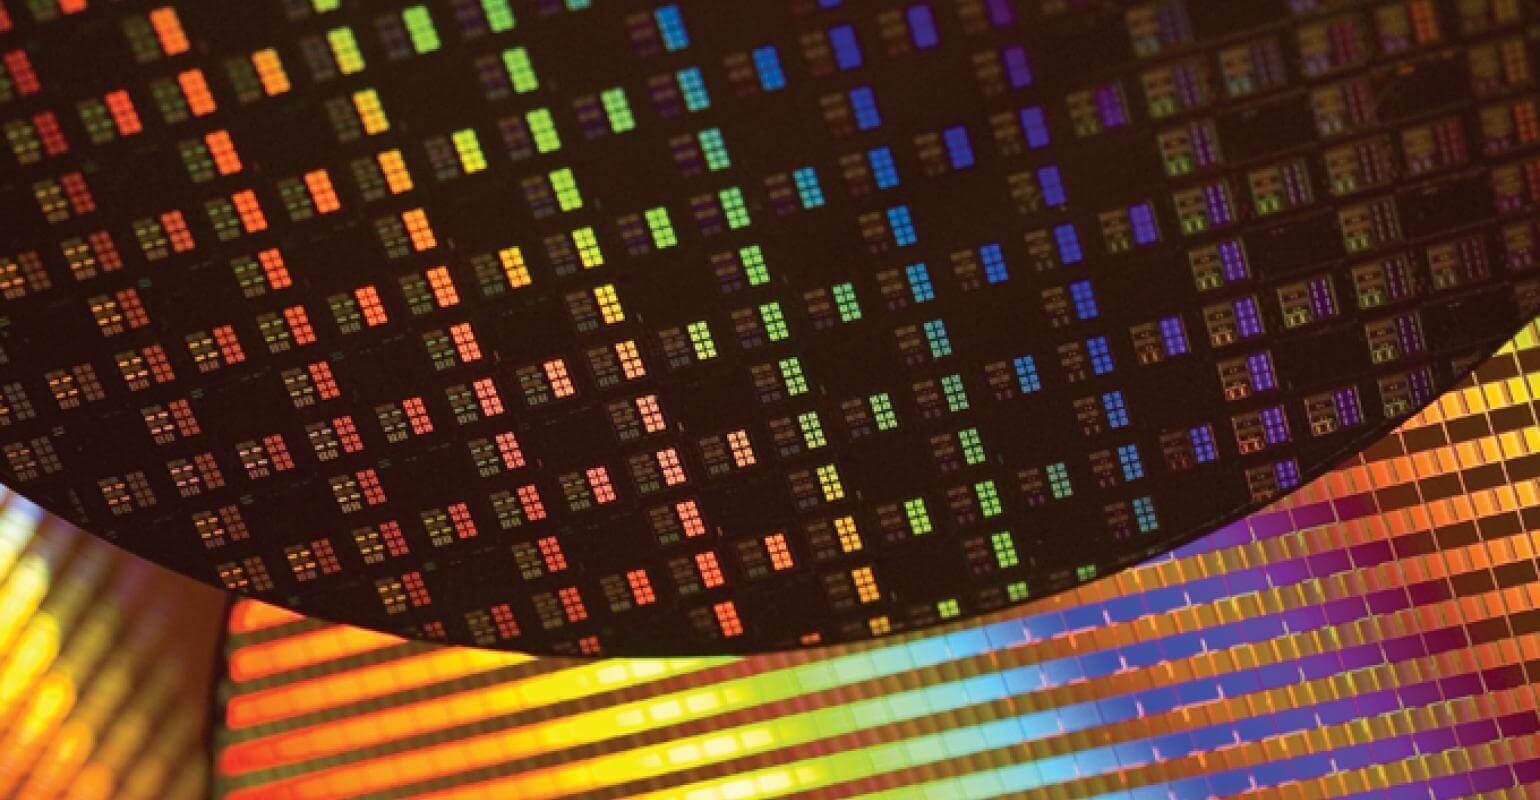 TSMC to start production on 5nm in second half of 2020, 3nm in 2022